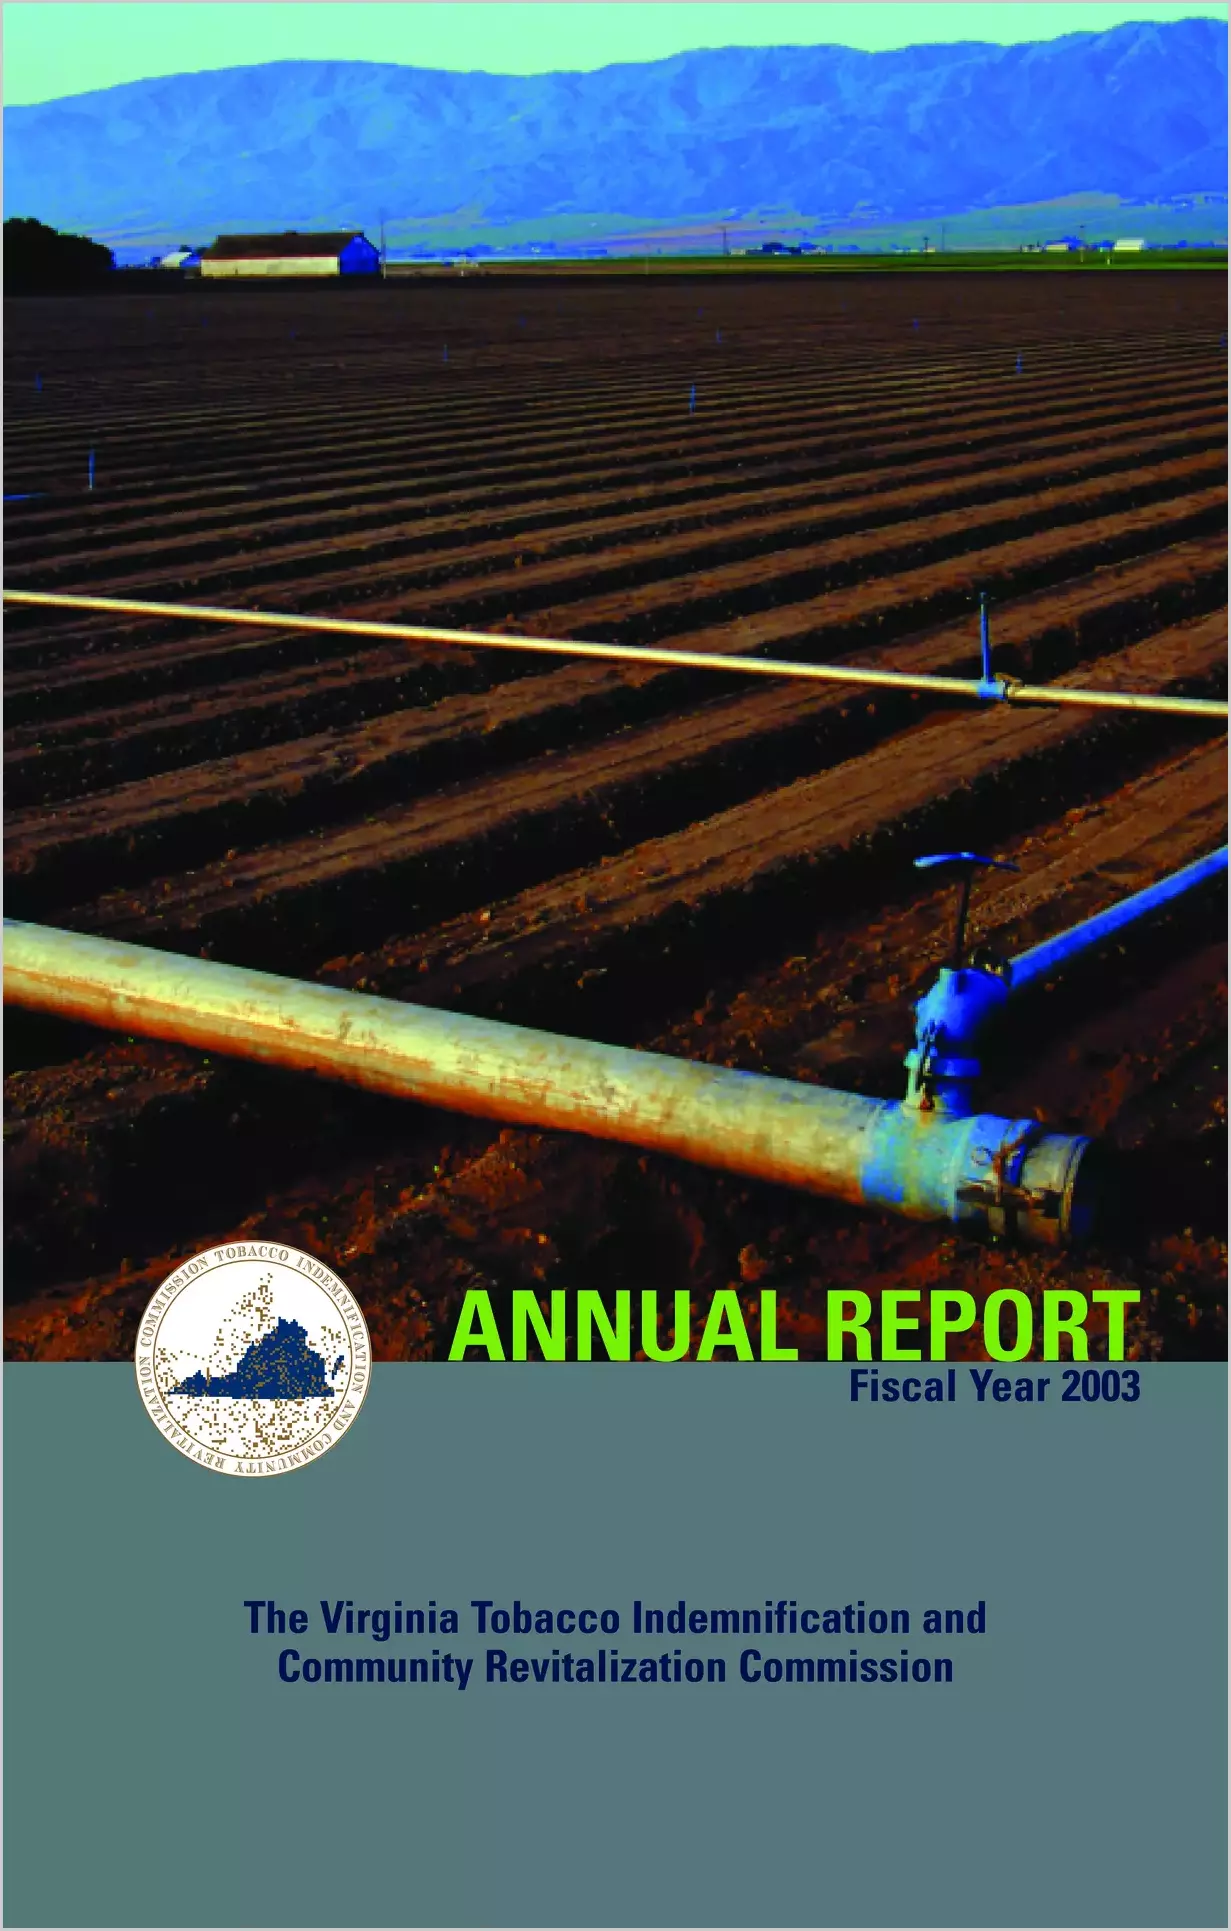 Virginia Tobacco Commission`s fiscal year 2003 annual report